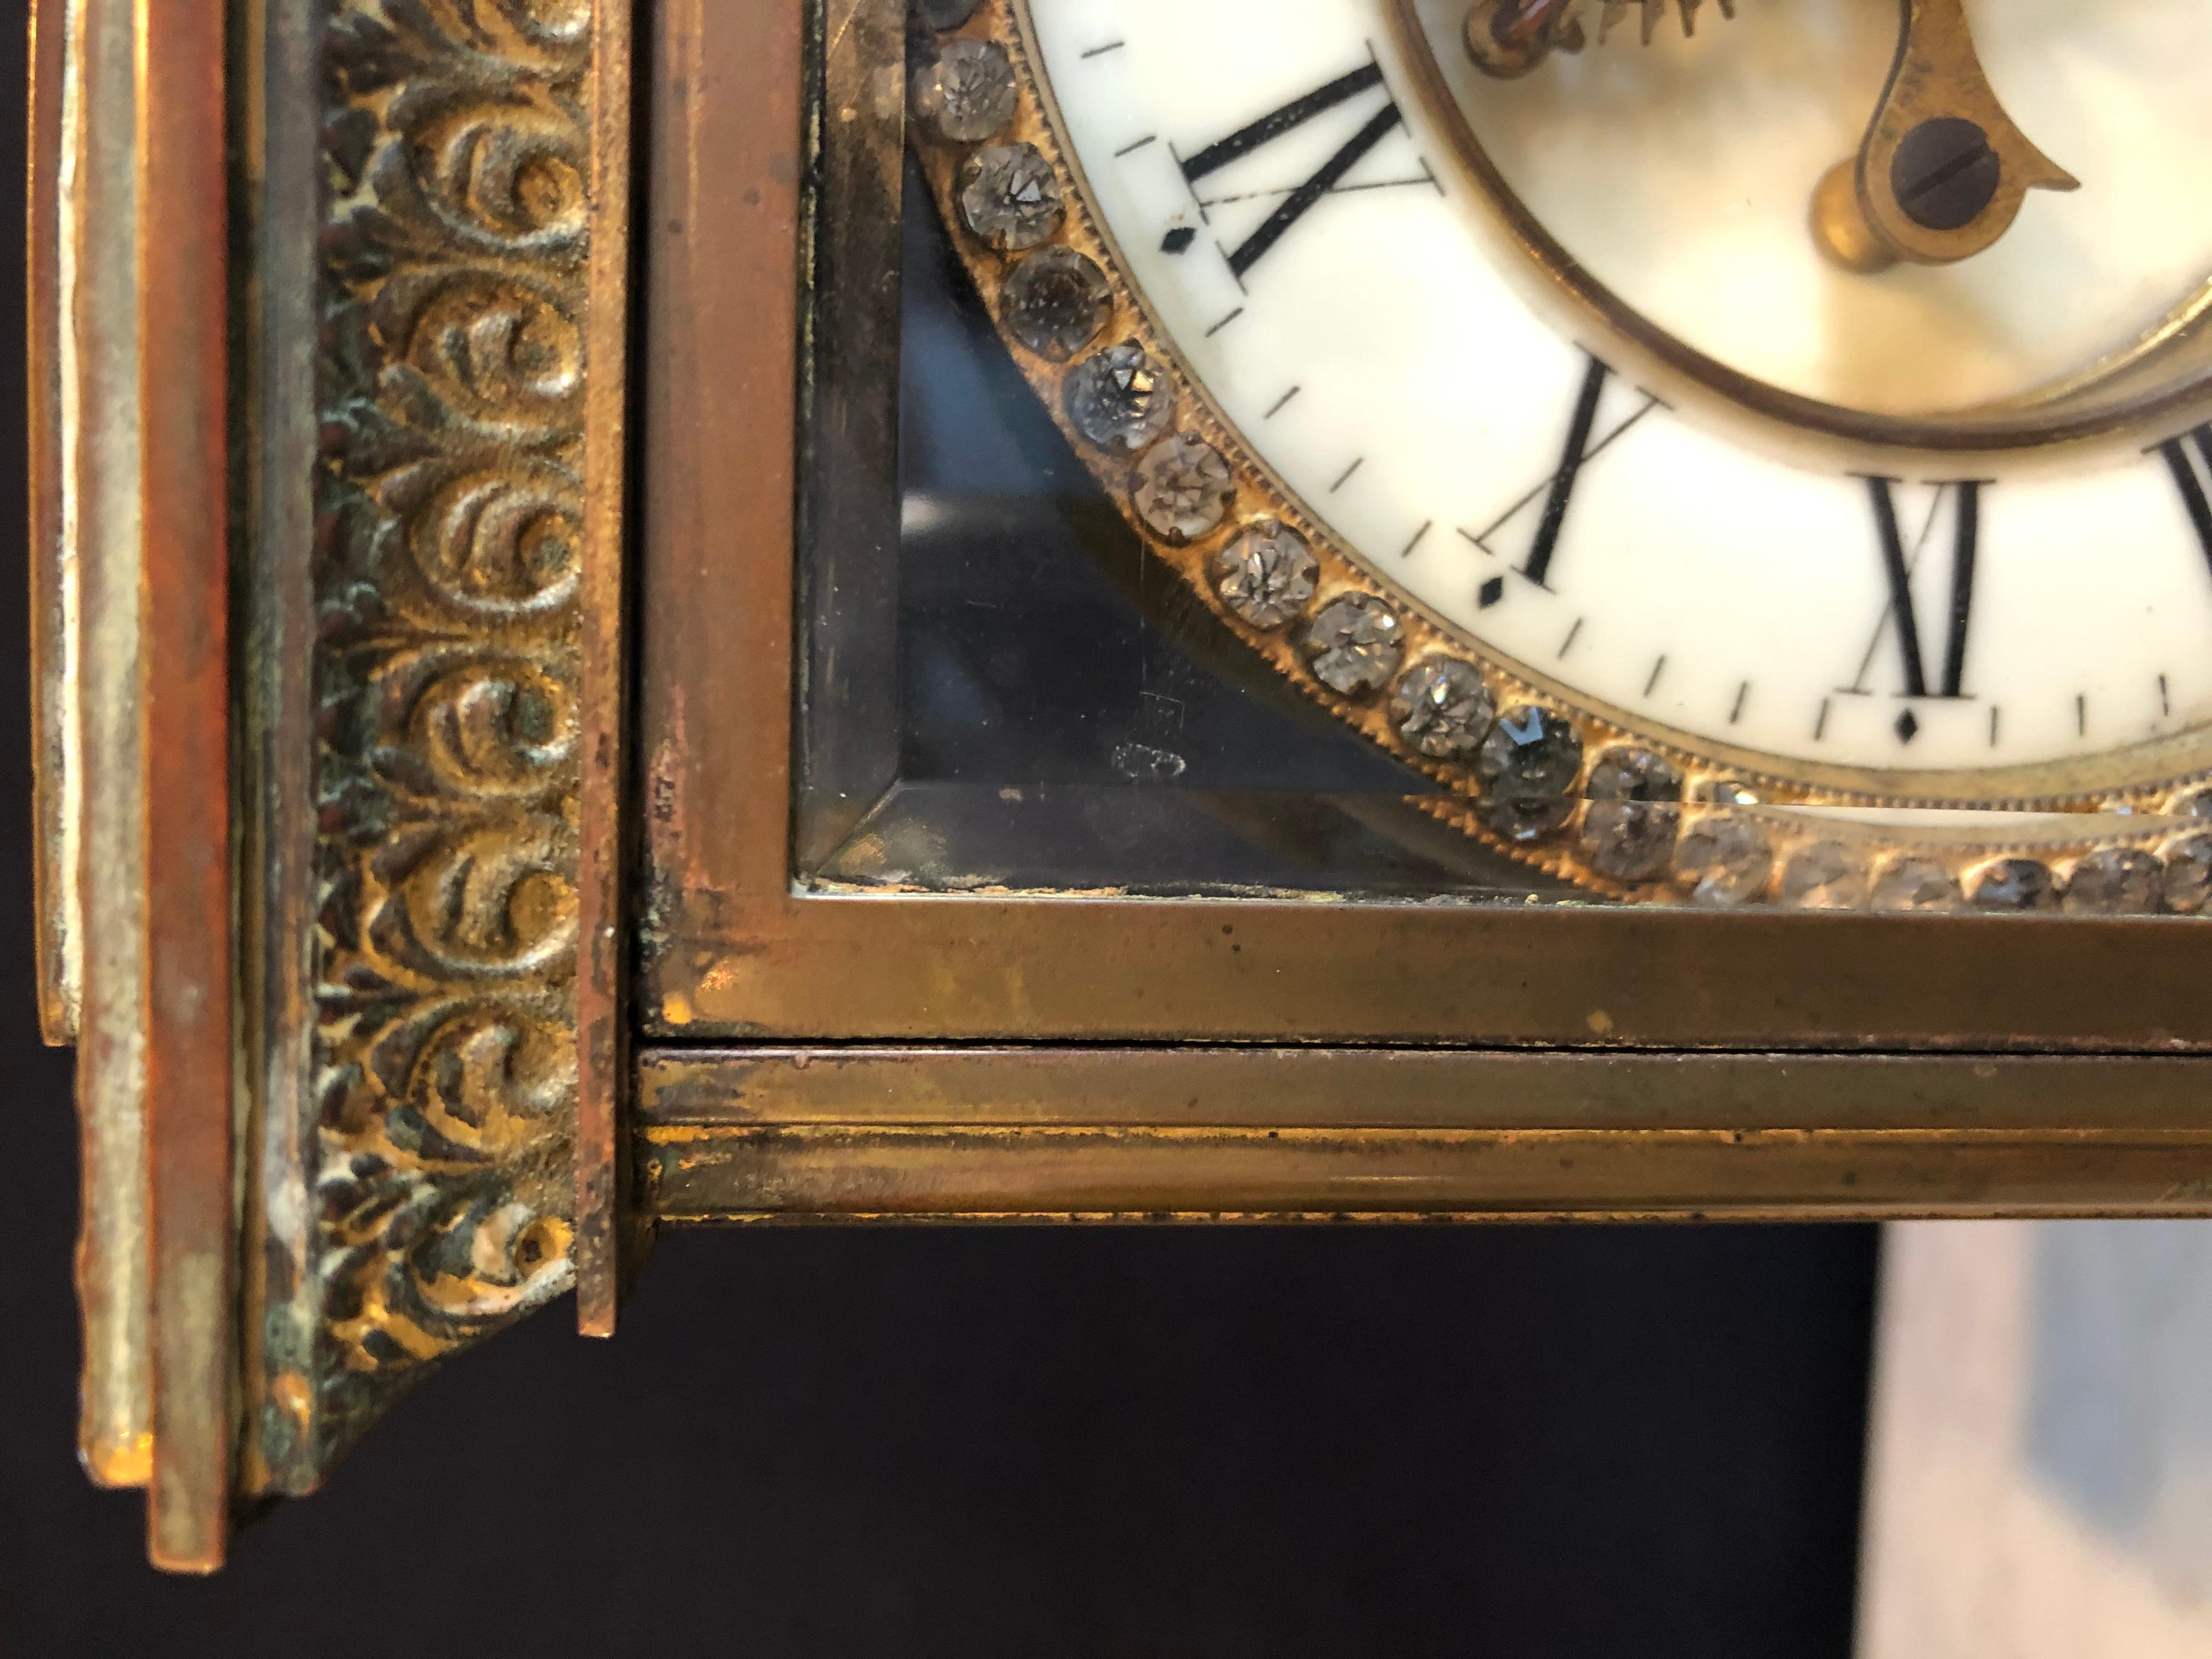 American Classical Crystal Face and Pendulum Clock Made by Ansonia Clock of New York For Sale